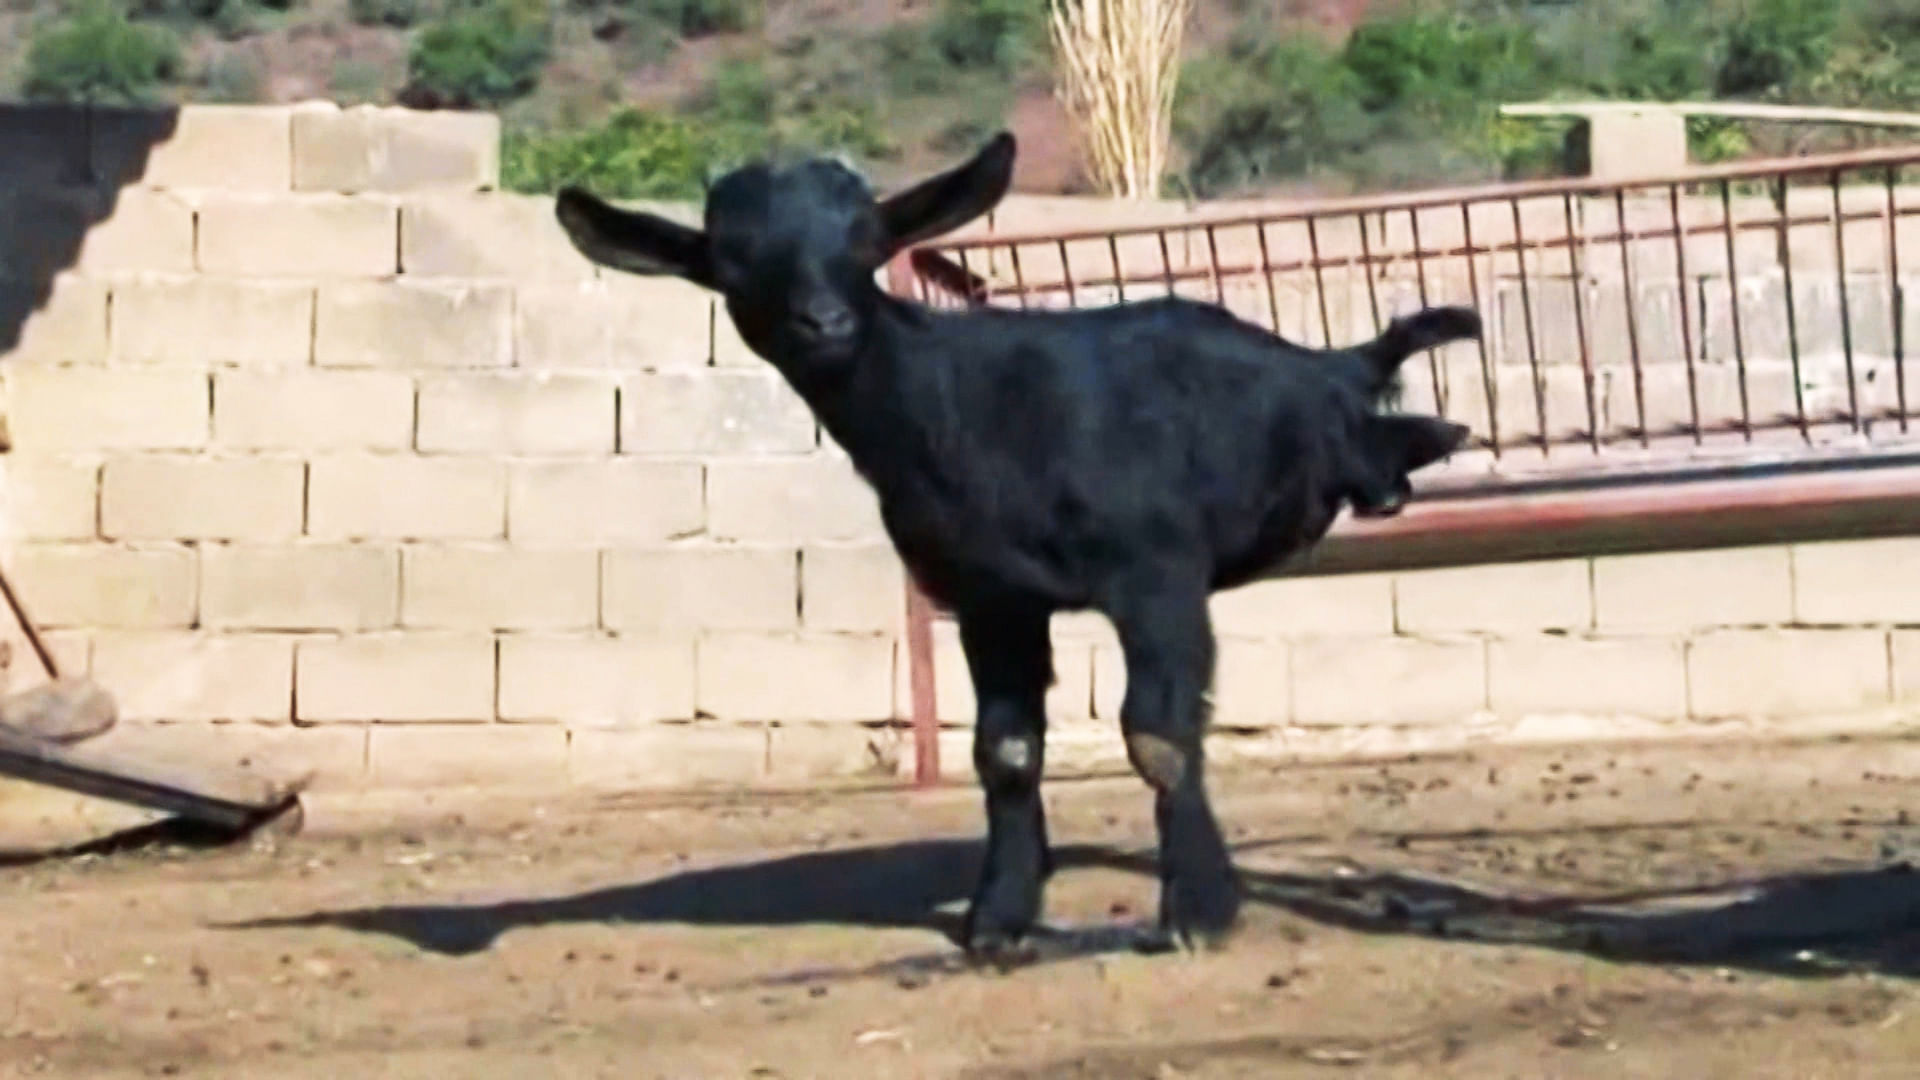 The black goat has managed to balance on just two legs. (Photo: AP Screengrab)